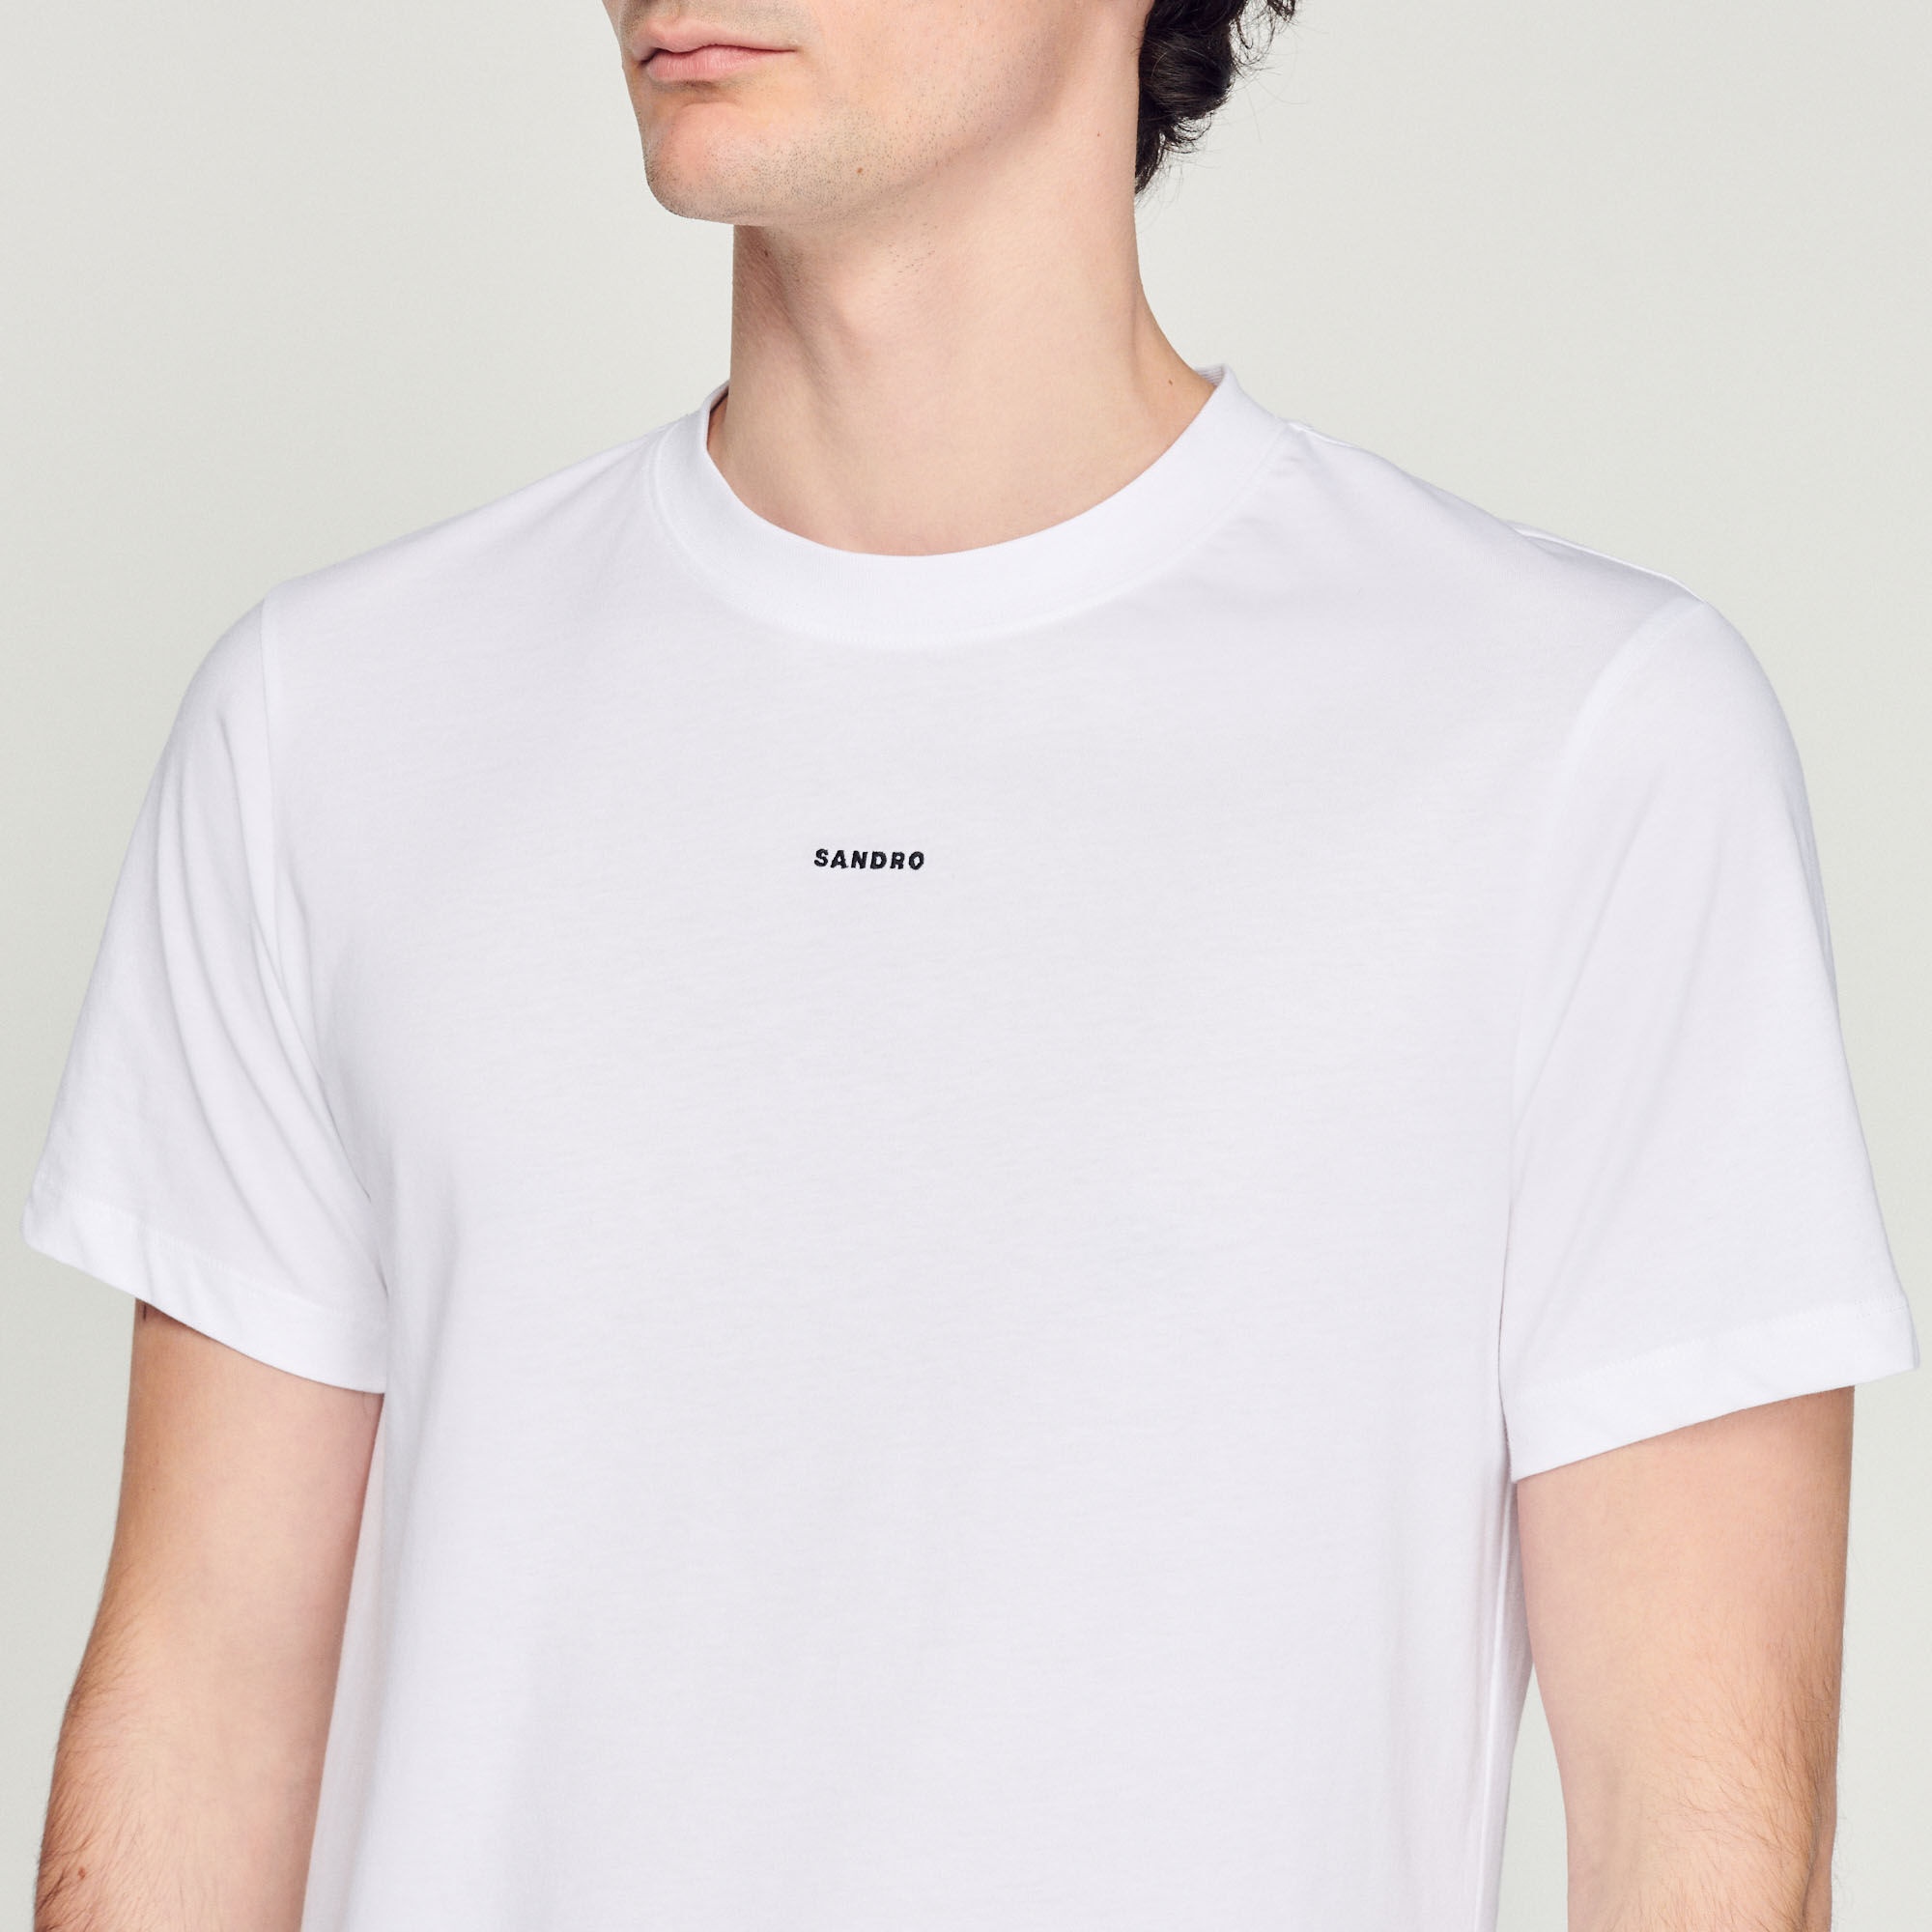 SANDRO EMBROIDERED T-SHIRT - 4